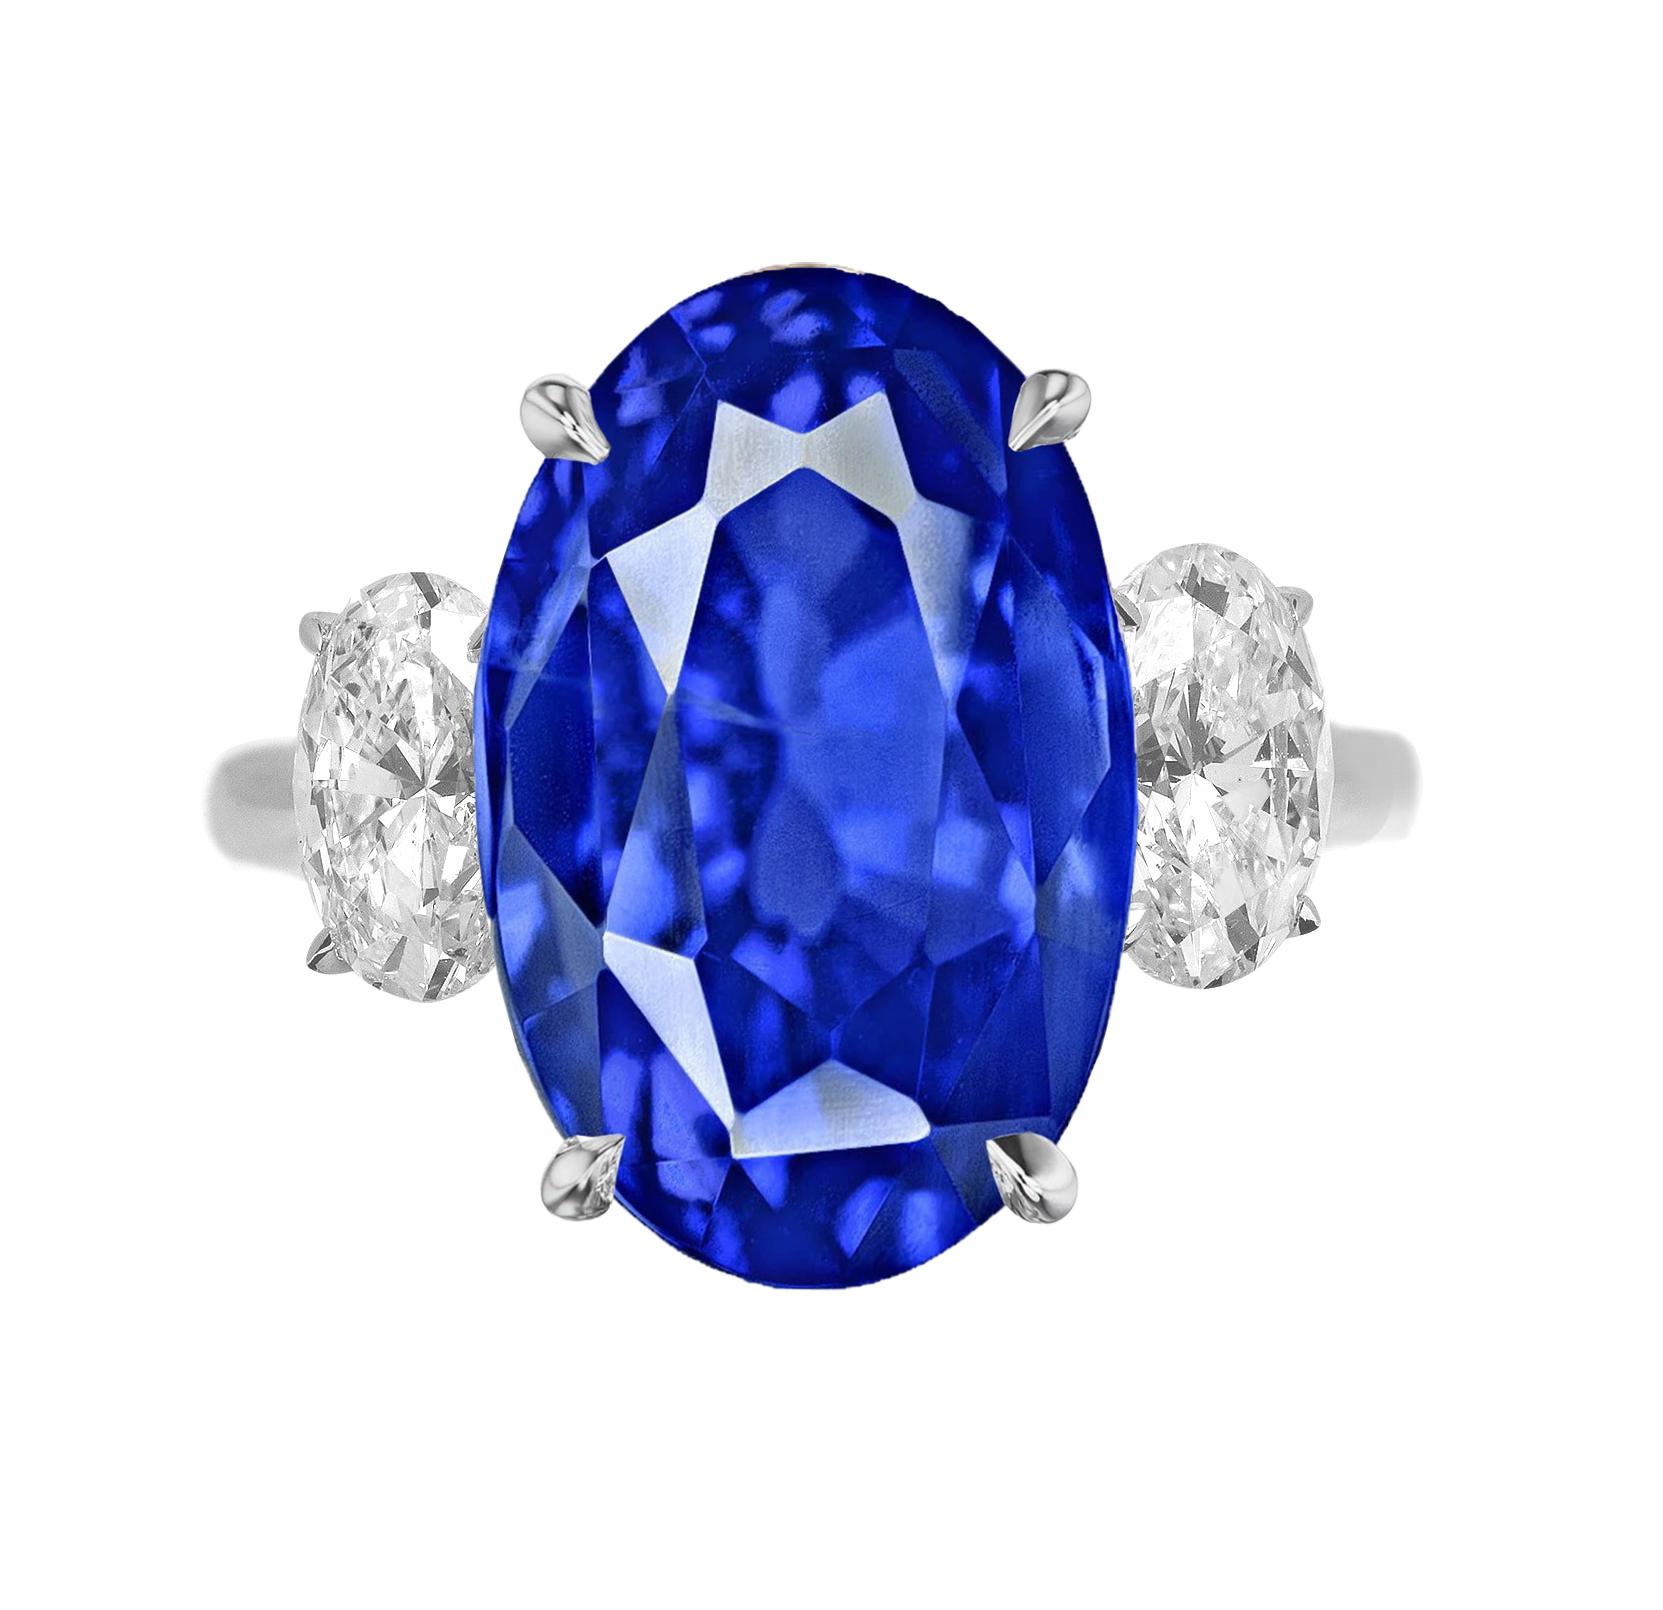 GIA certified oval cut blue sapphire is completely unheated and displays striking, vibrant blue color! The sapphire is certified by GIA, the premier gemological authority. GIA determined the ruby to be unheated and completely natural earth mined.